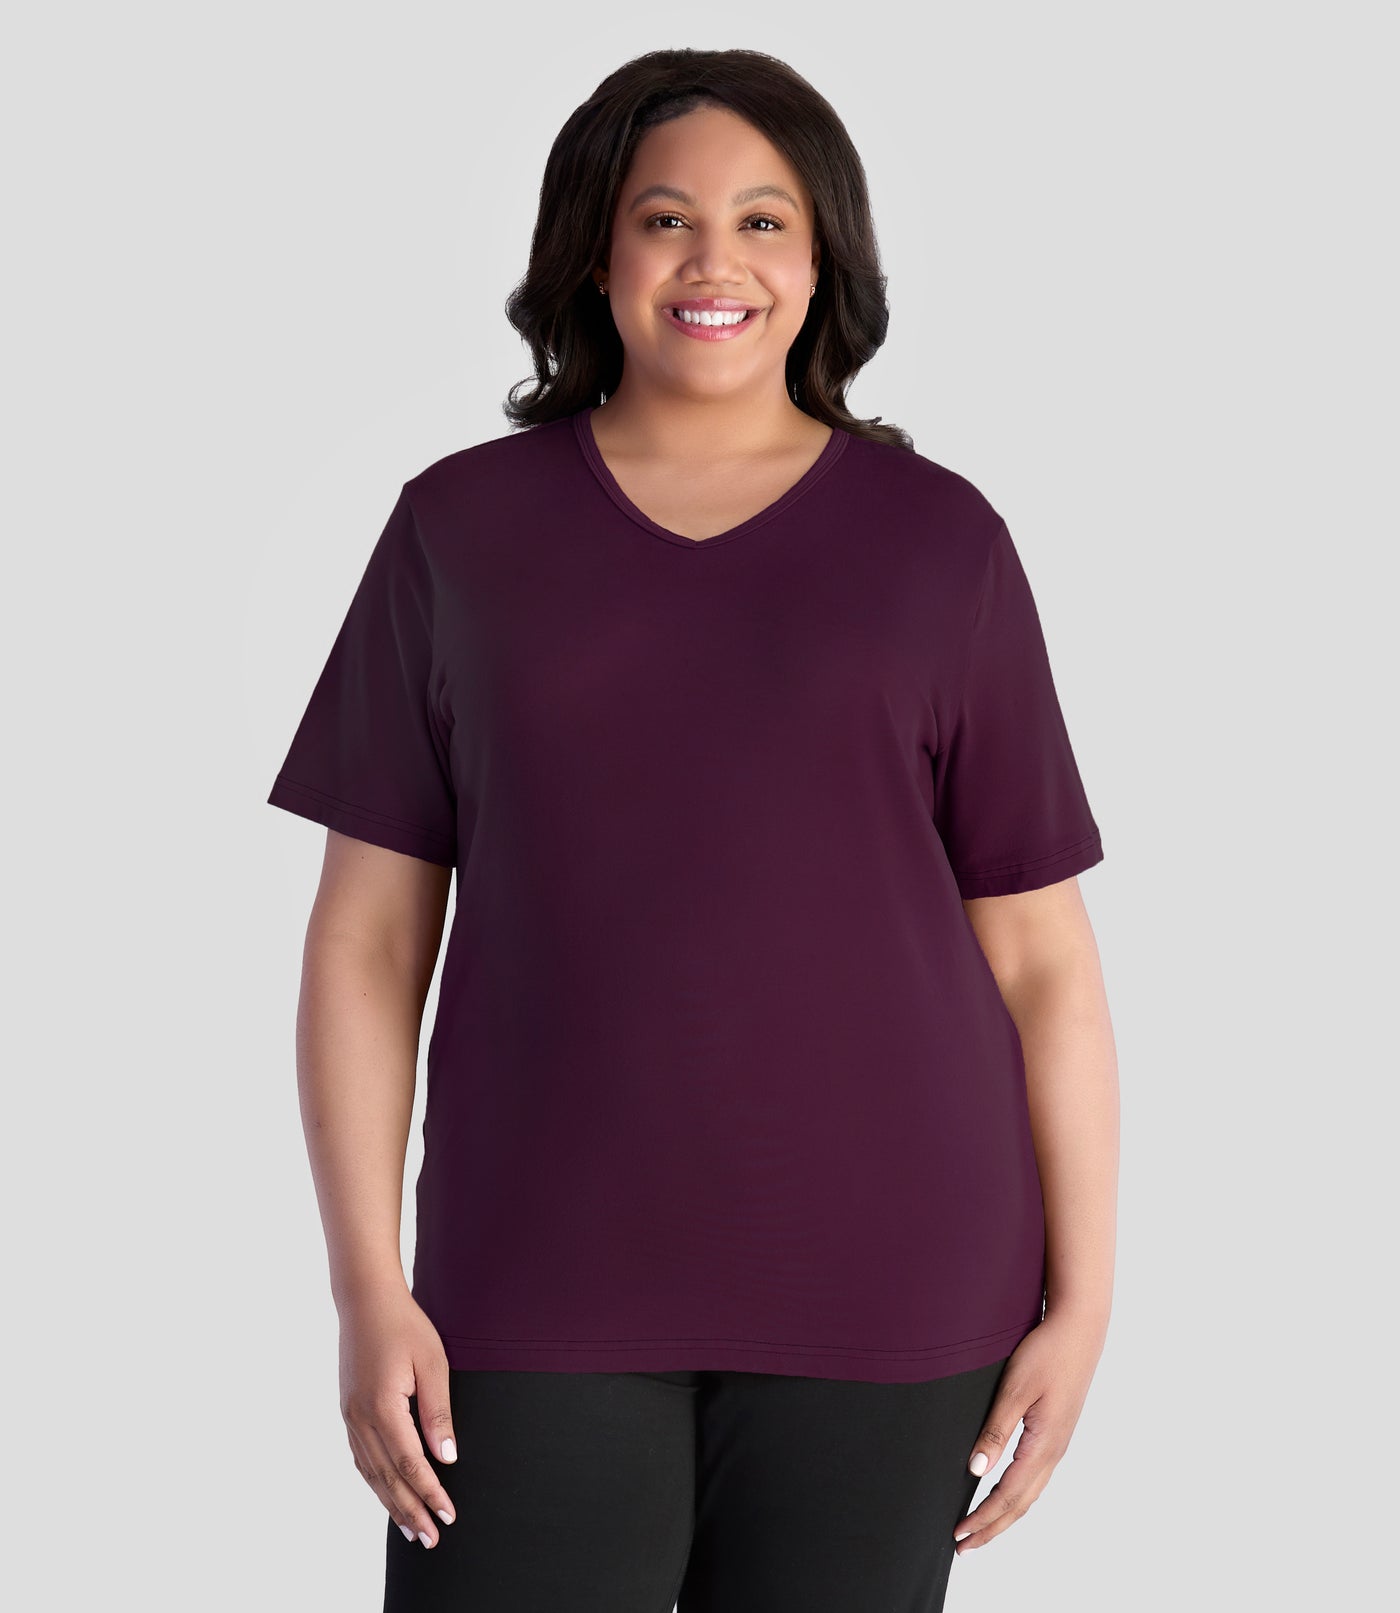 JunoActive model wearing EasyLuxe Classics V-Neck Top  in color wine. Model is facing forward with her arms by her side.